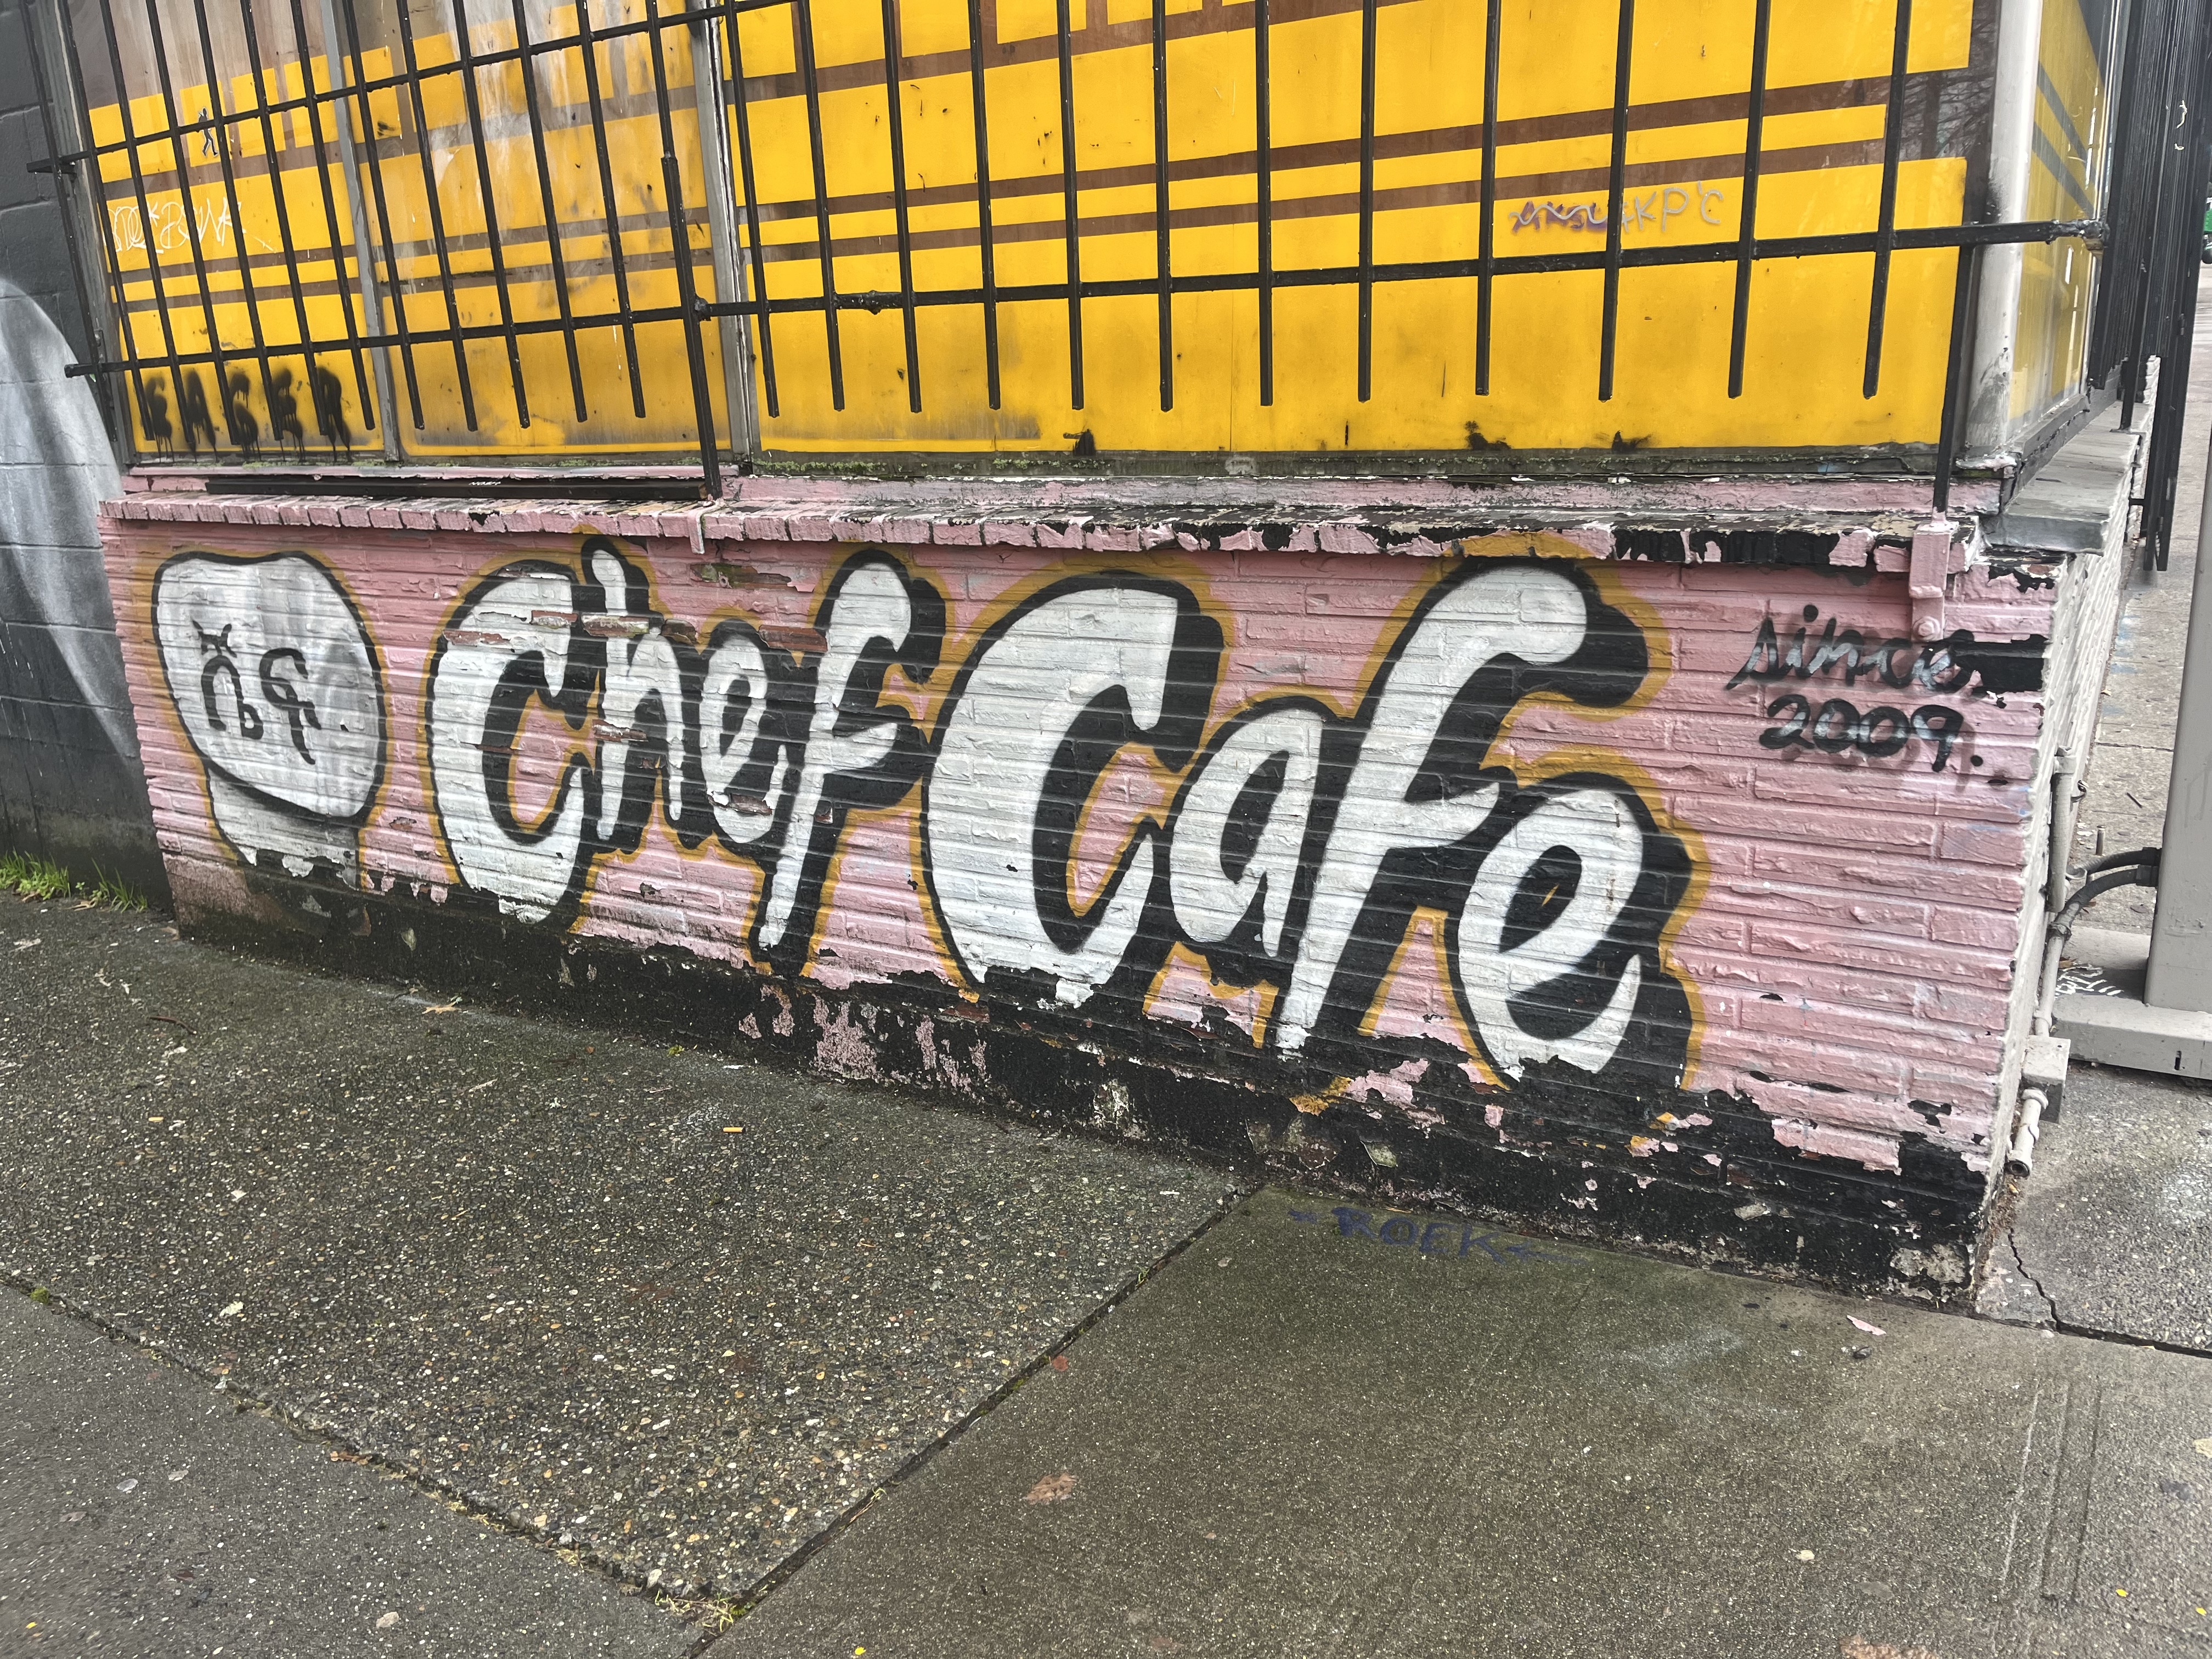 A mural that reads “Chef Cafe.”